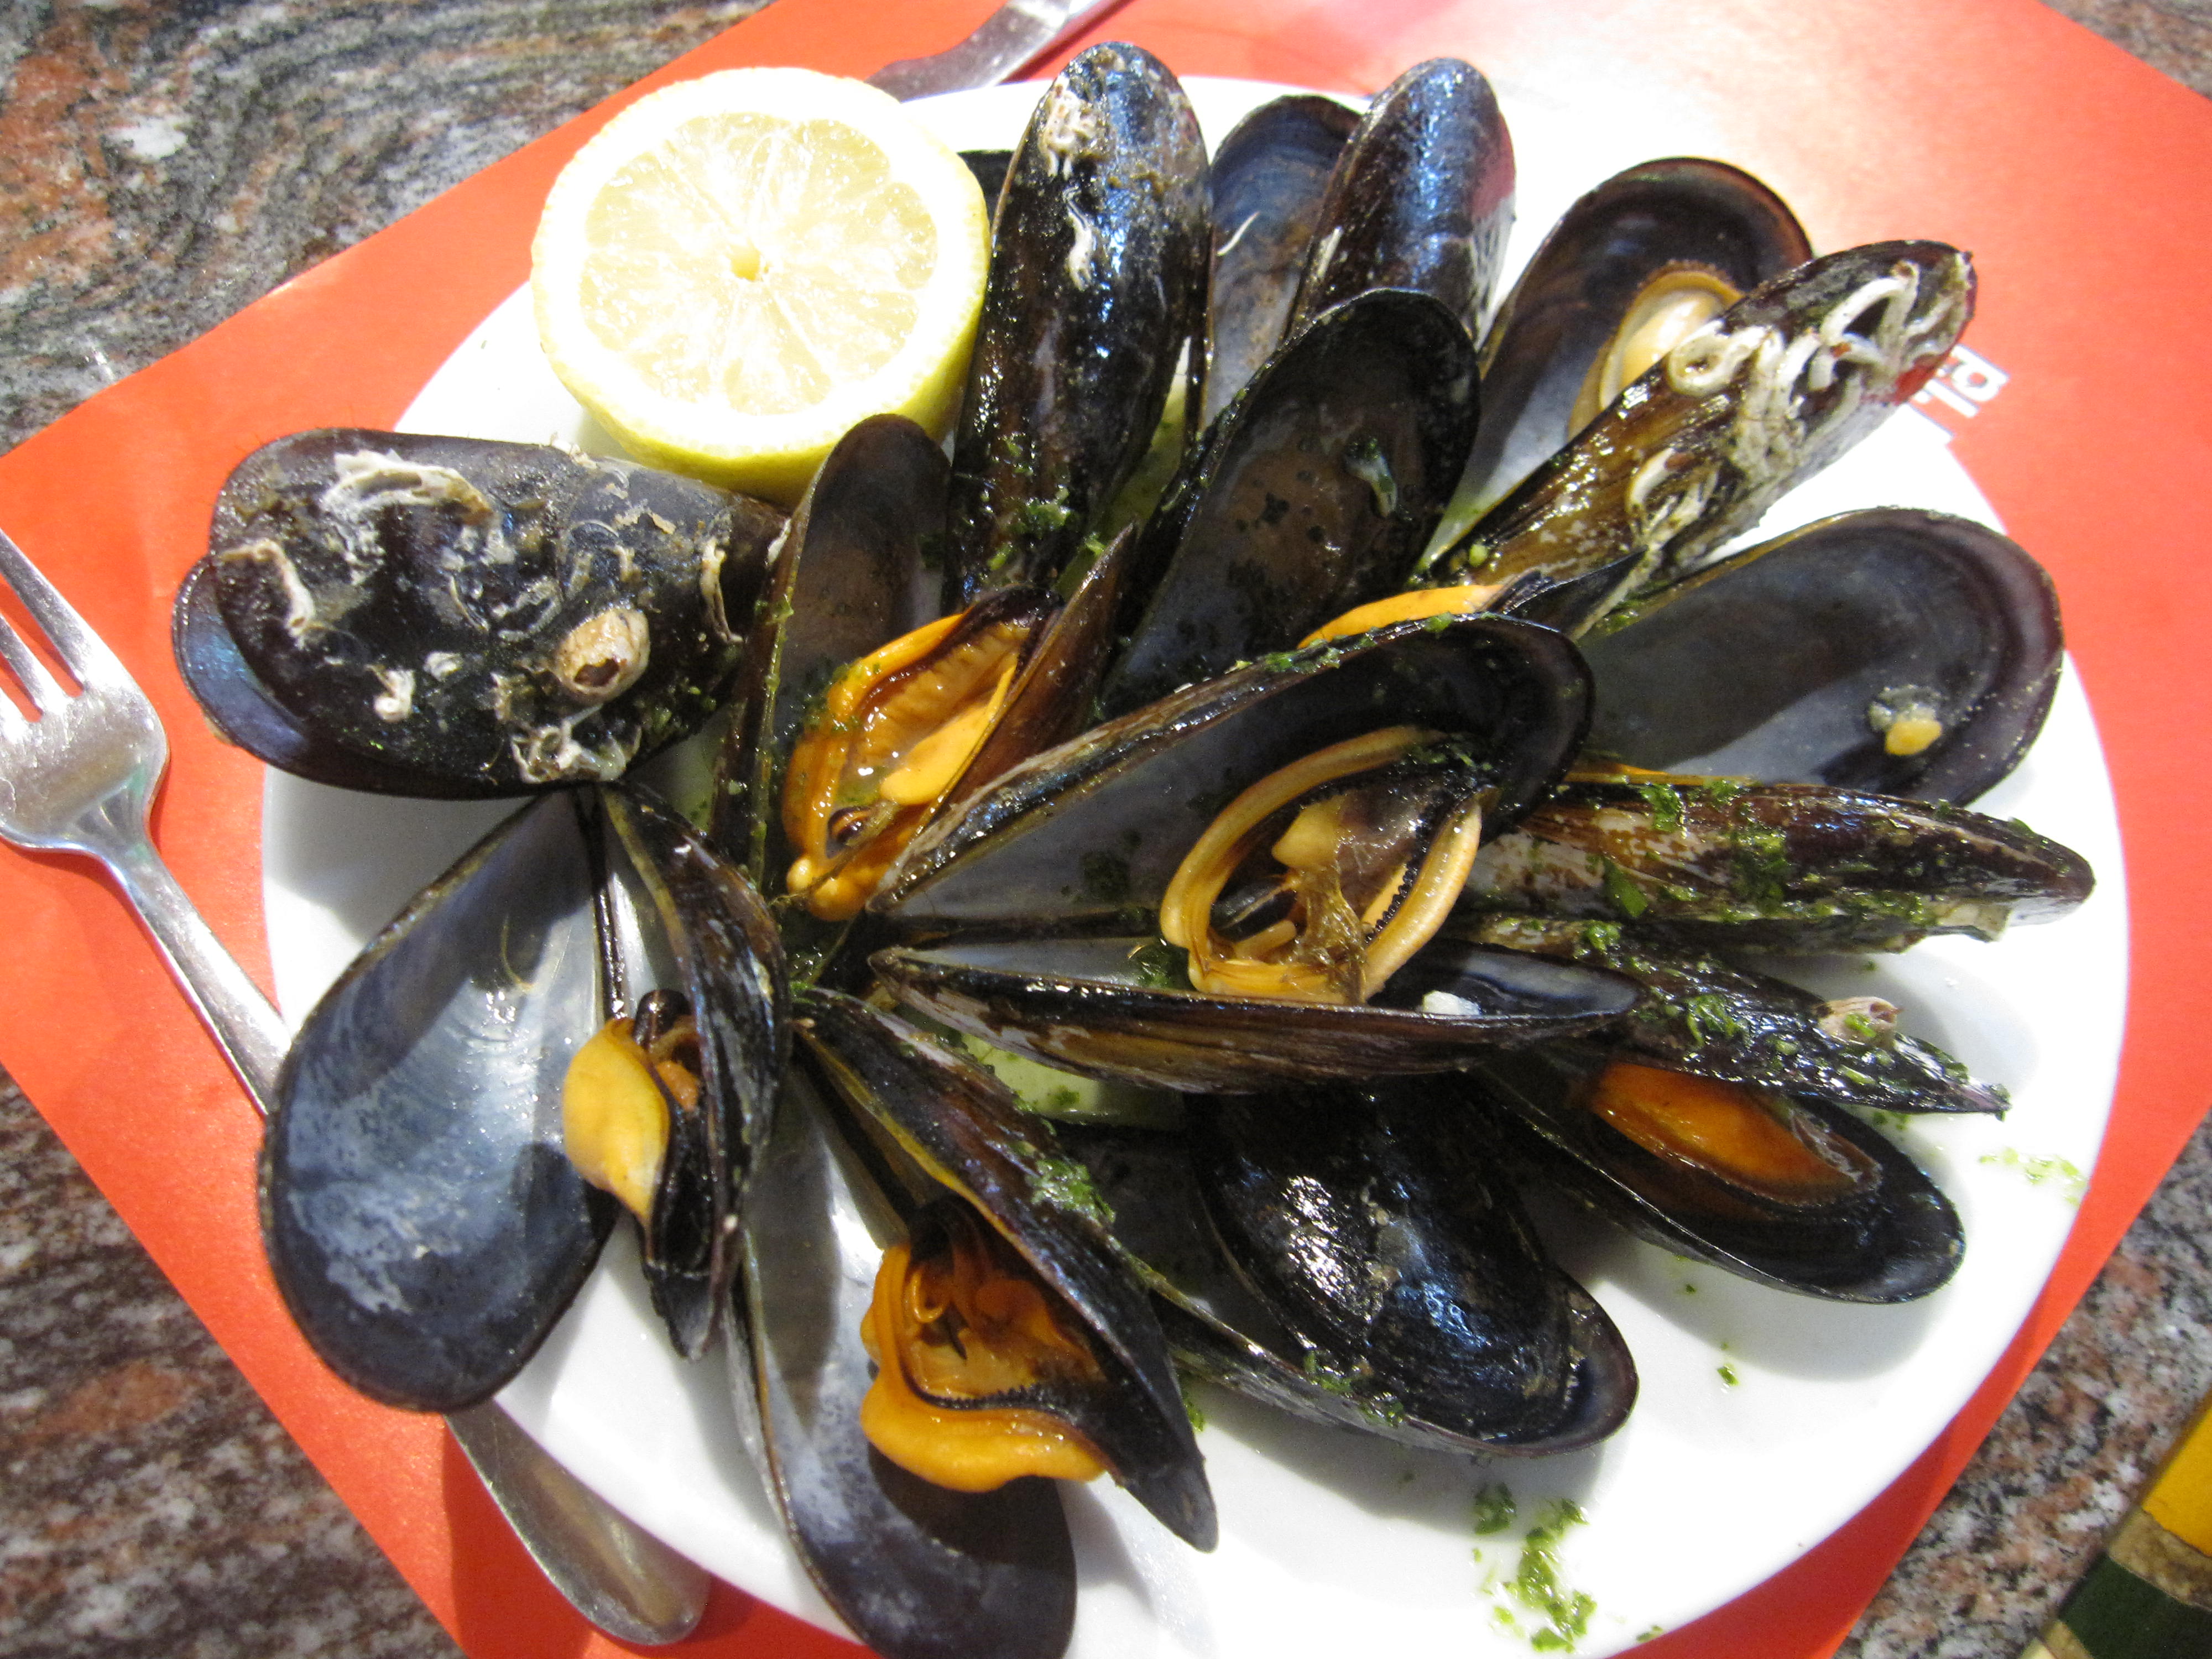 the Most Amazing Mussels I've ever had